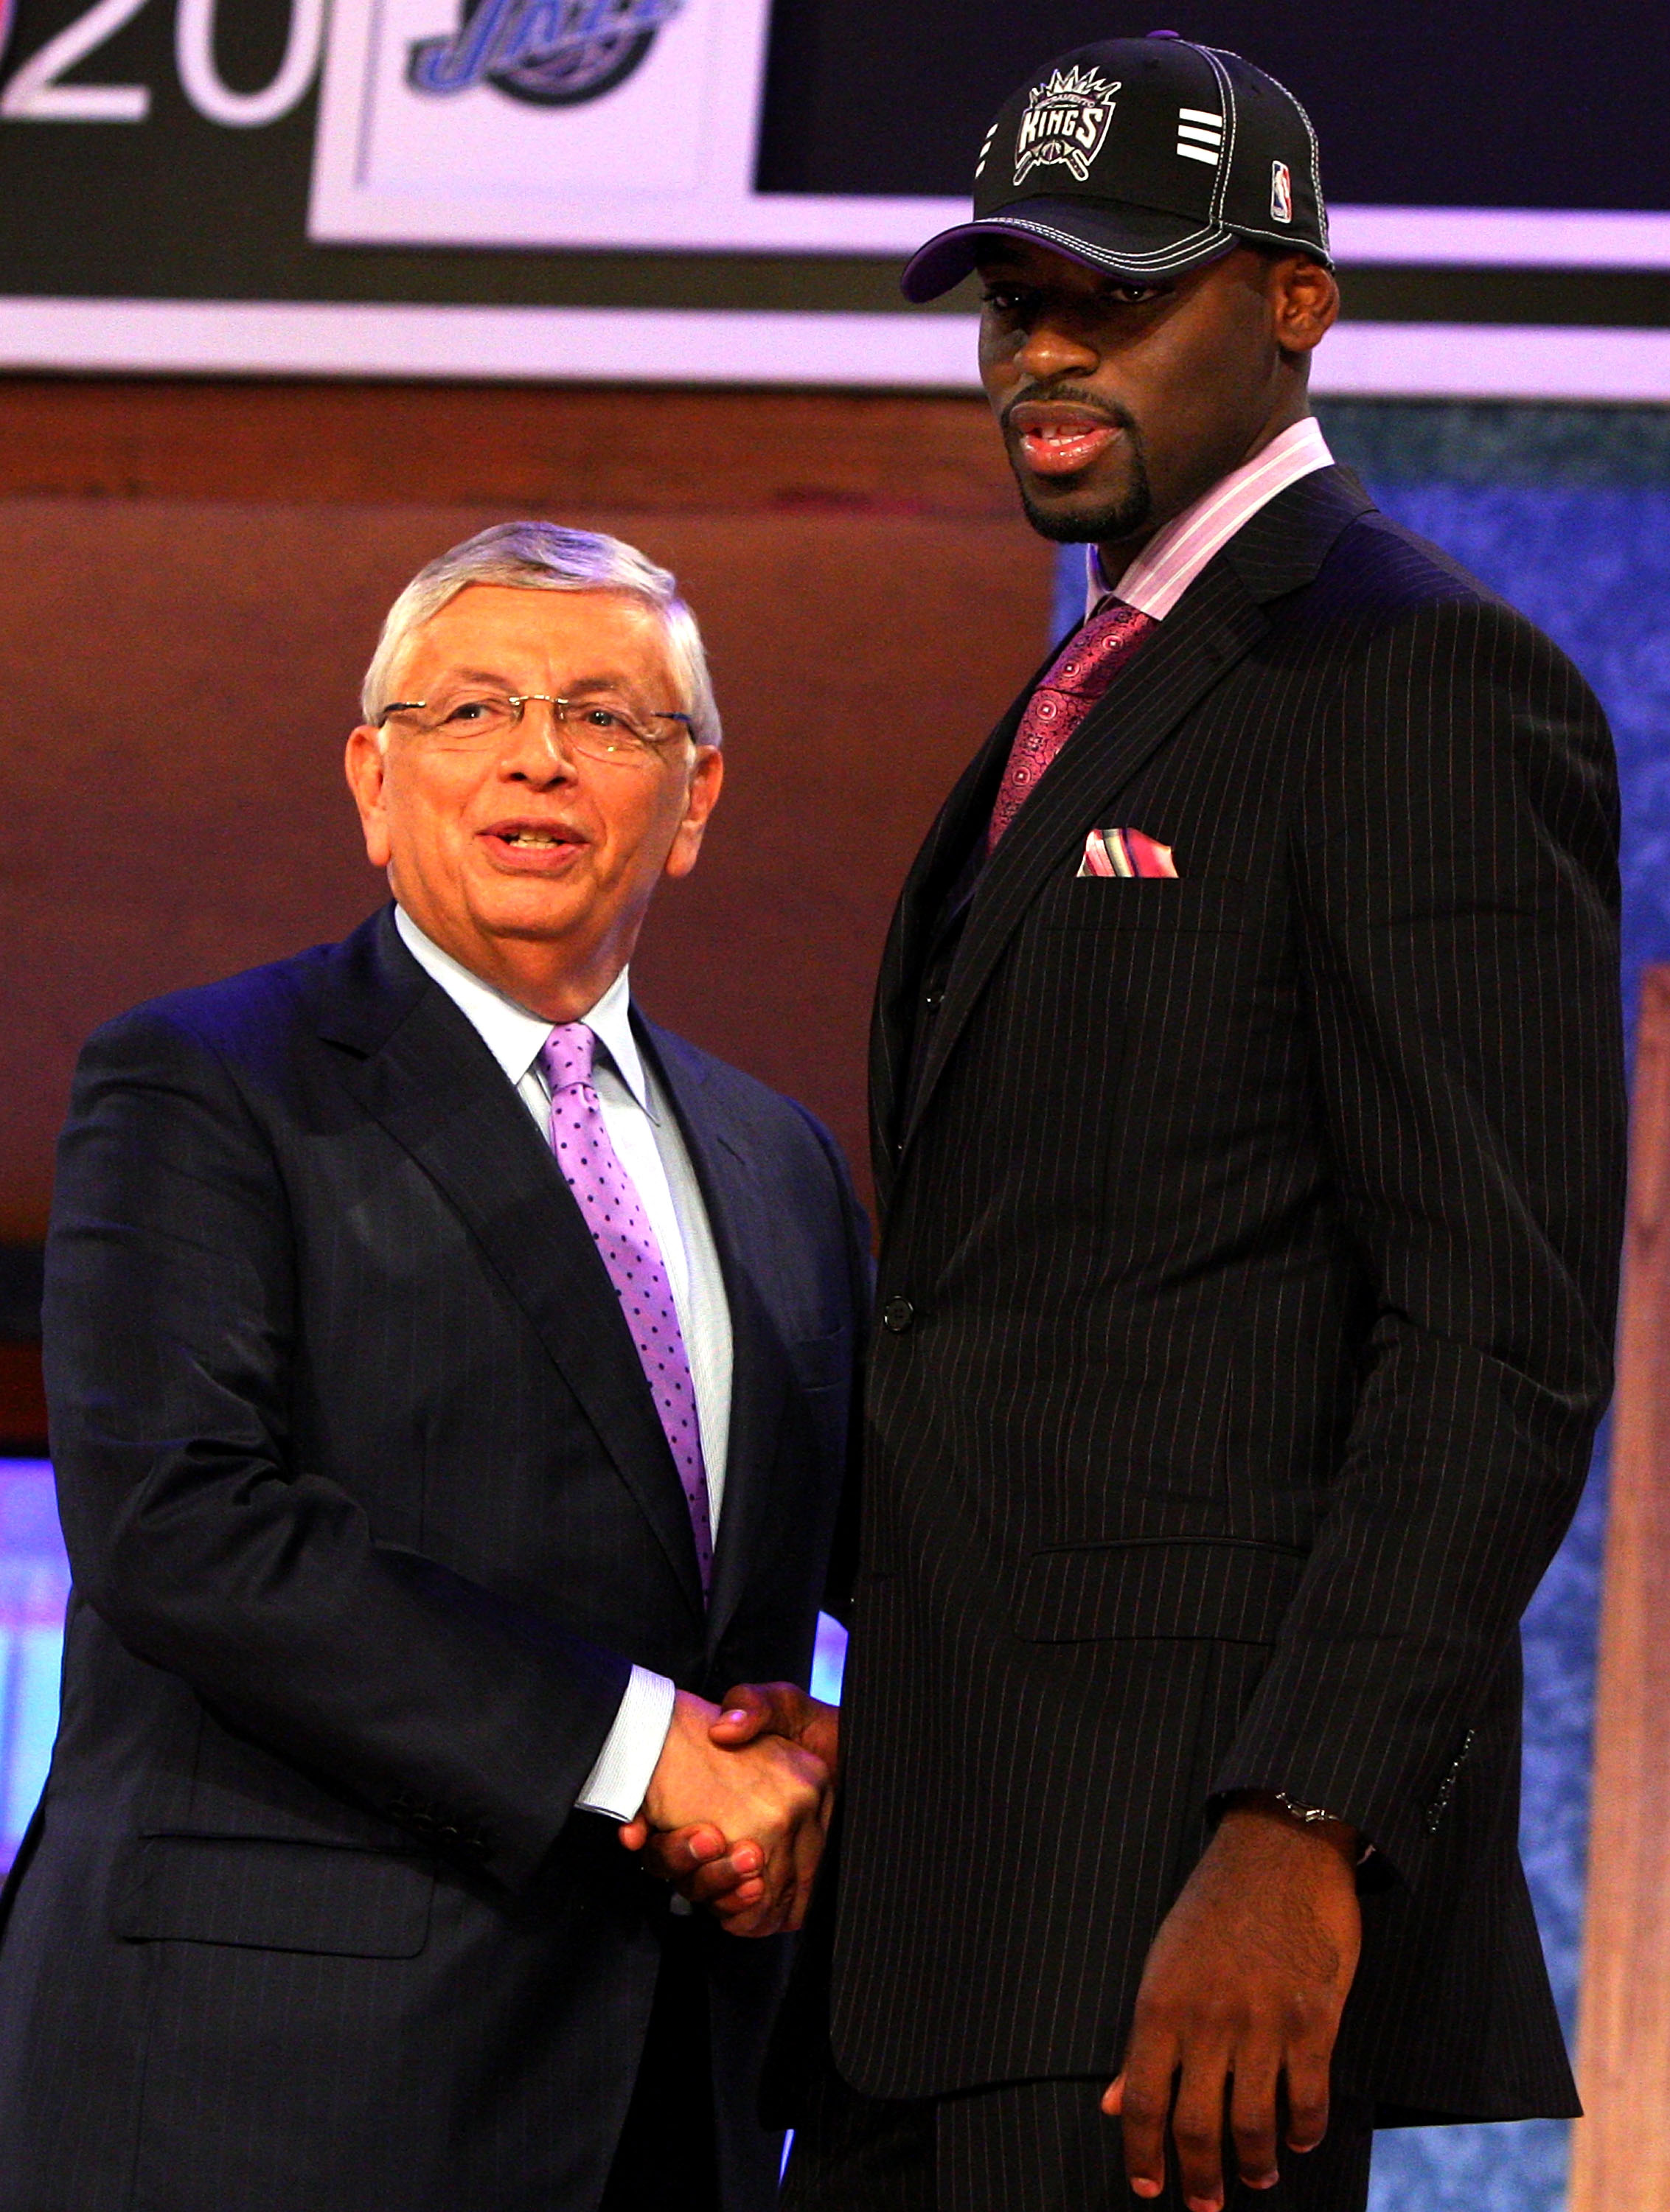 NEW YORK - JUNE 25:  NBA Commissioner David Stern poses for a photograph with the fourth overall draft pick by the Sacramento Kings,  Tyreke Evans during the 2009 NBA Draft at the Wamu Theatre at Madison Square Garden June 25, 2009 in New York City. NOTE